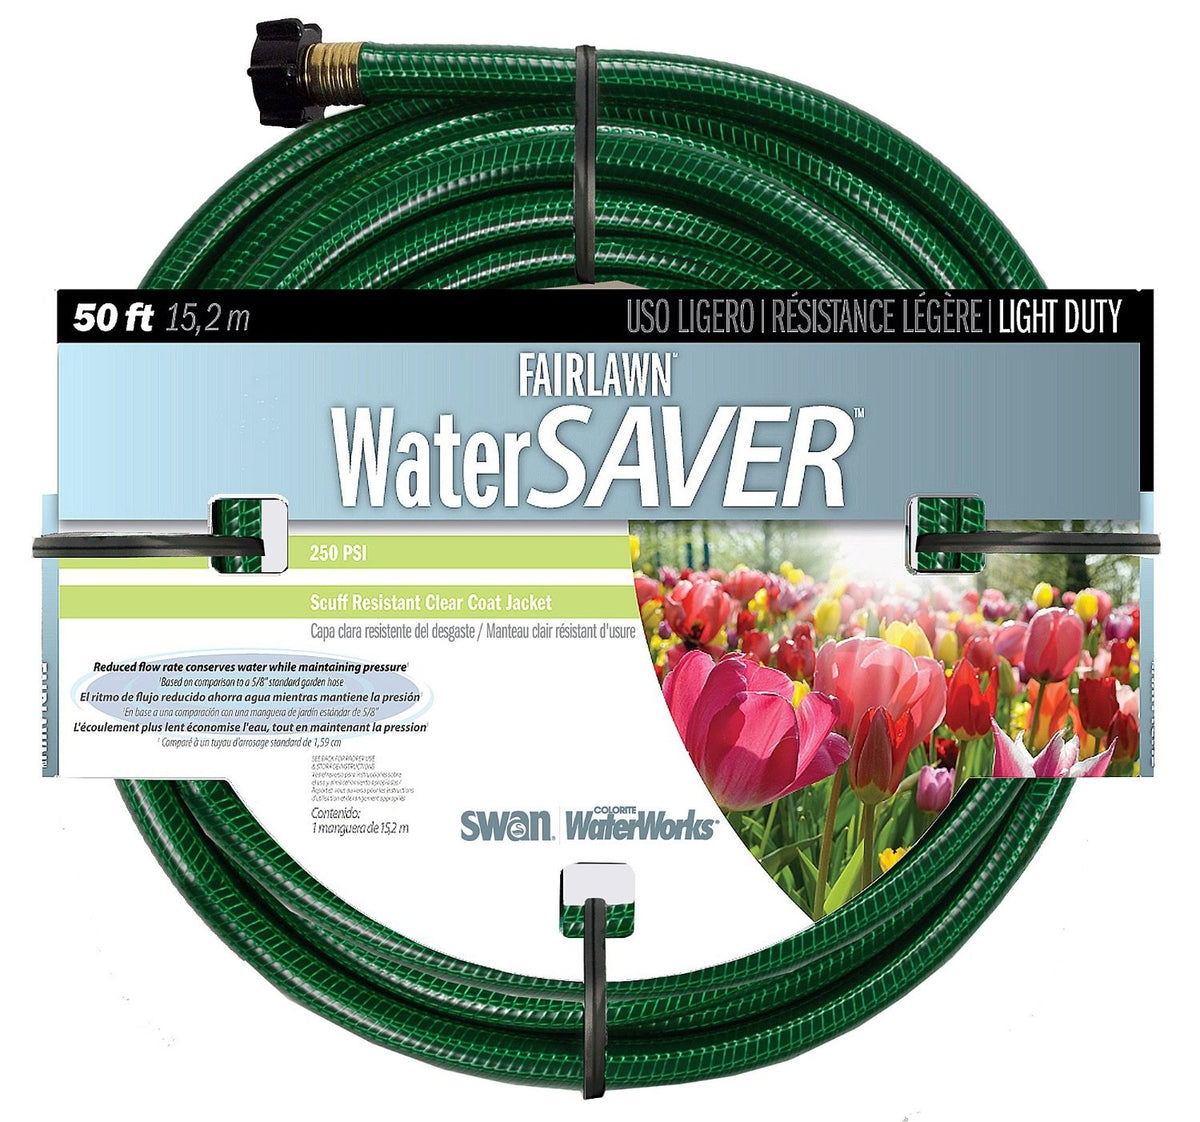 buy garden hose & accessories at cheap rate in bulk. wholesale & retail lawn & plant protection items store.